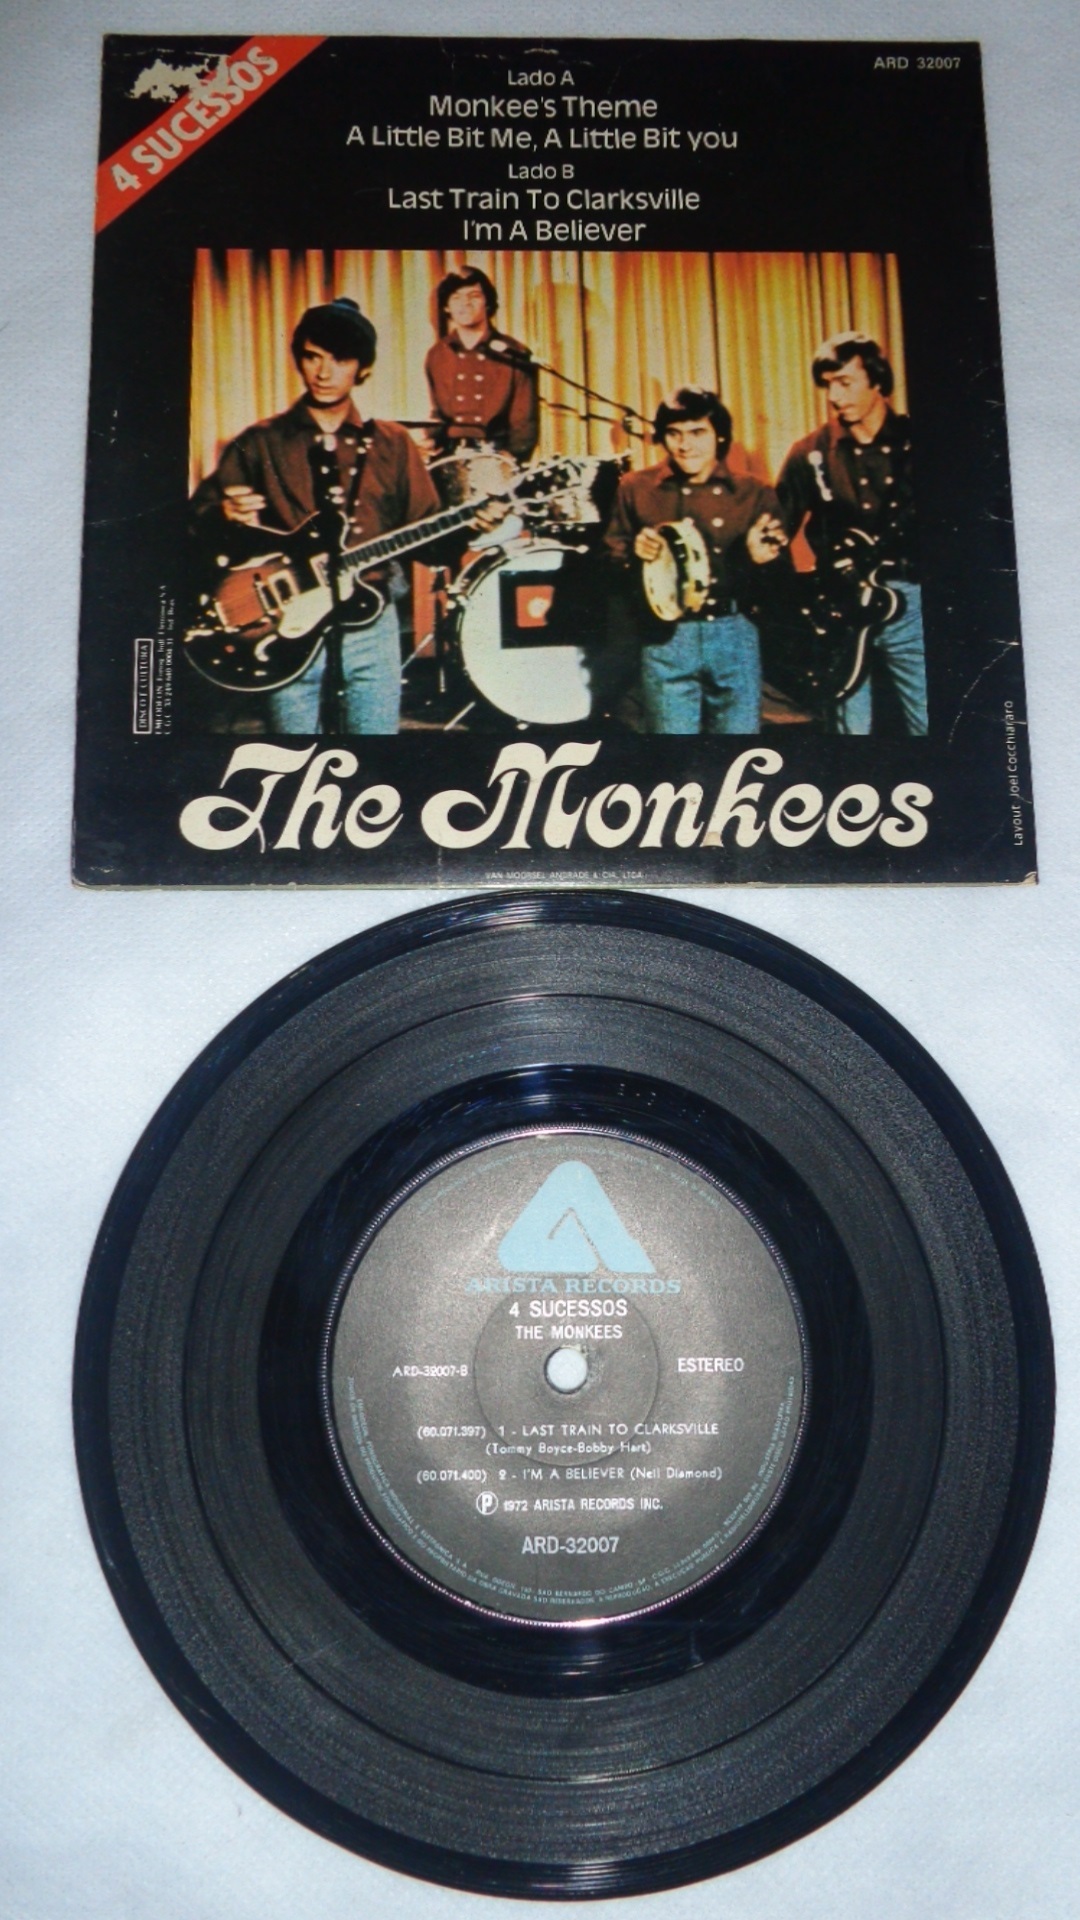 VINIL COMPACTO - Monkees the - 4 Sucessos